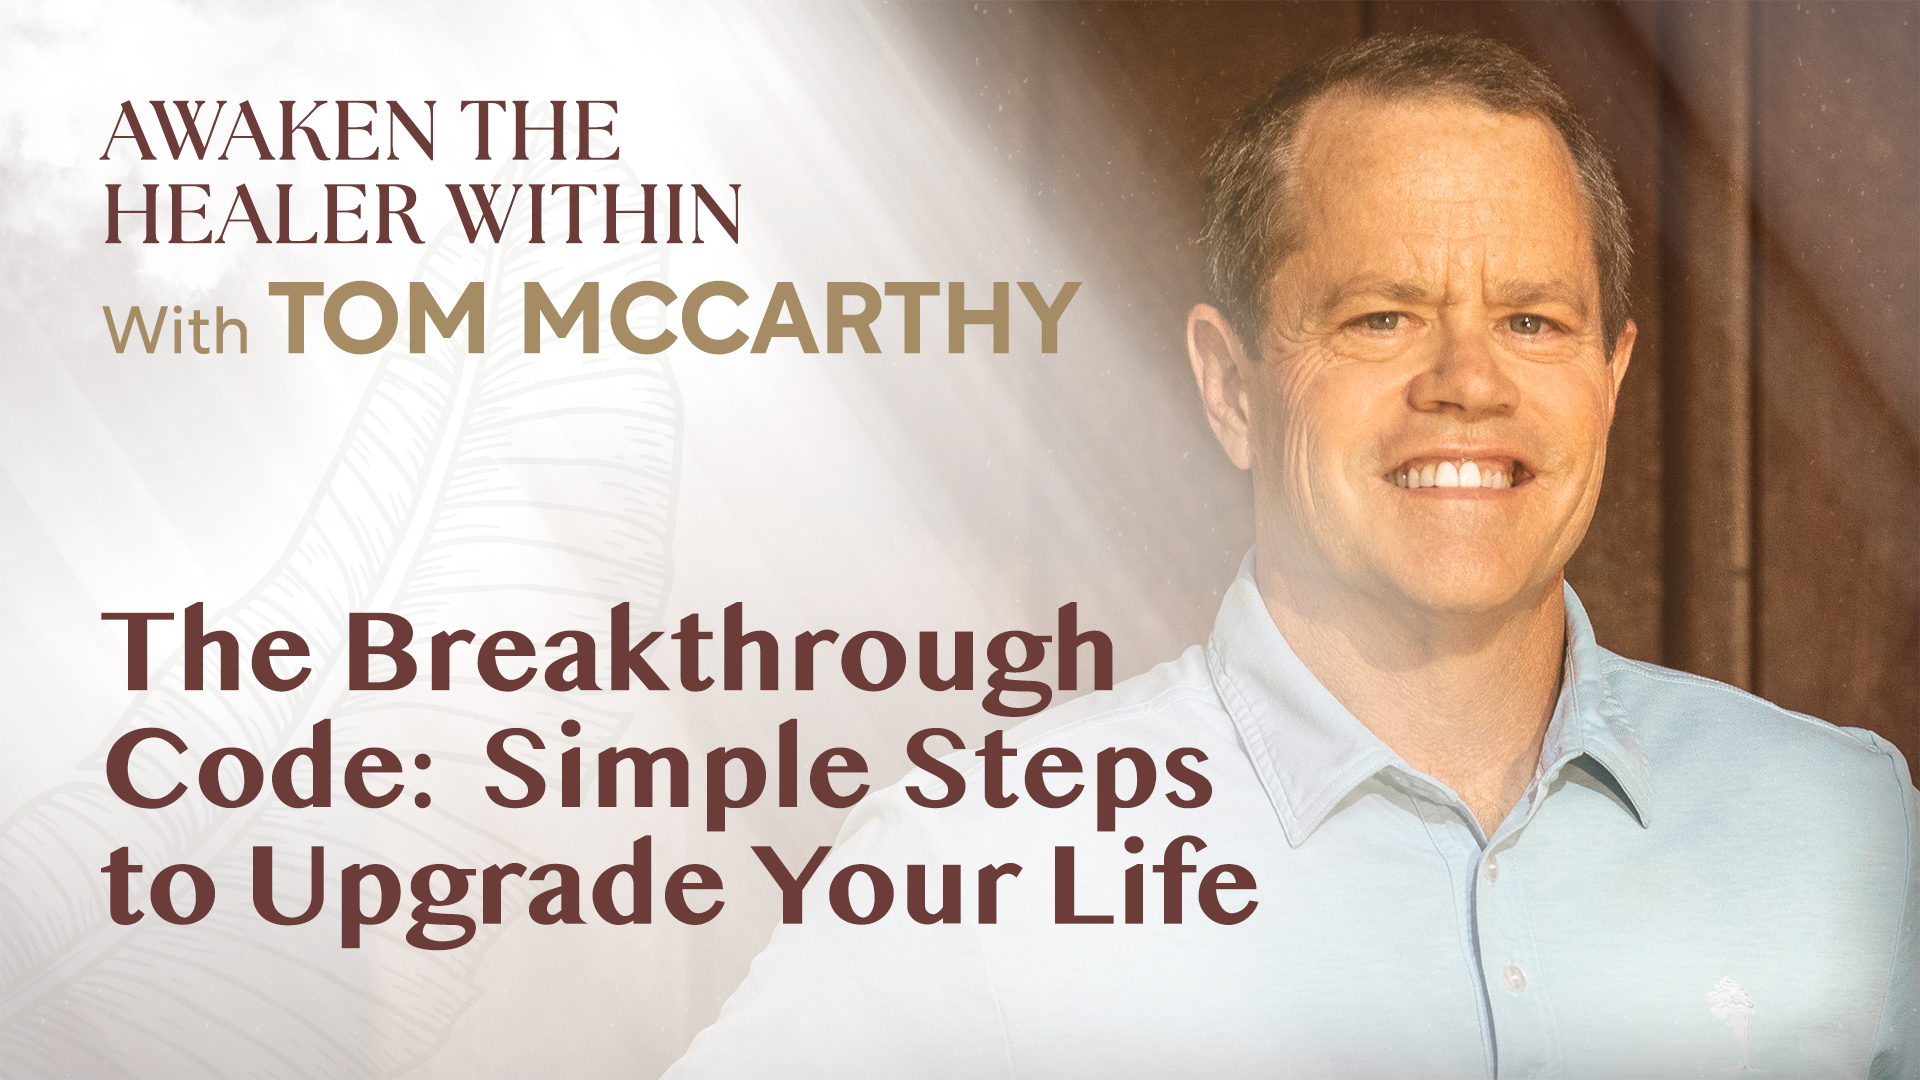 The Breakthrough Code: Simple Steps to Upgrade Your Life